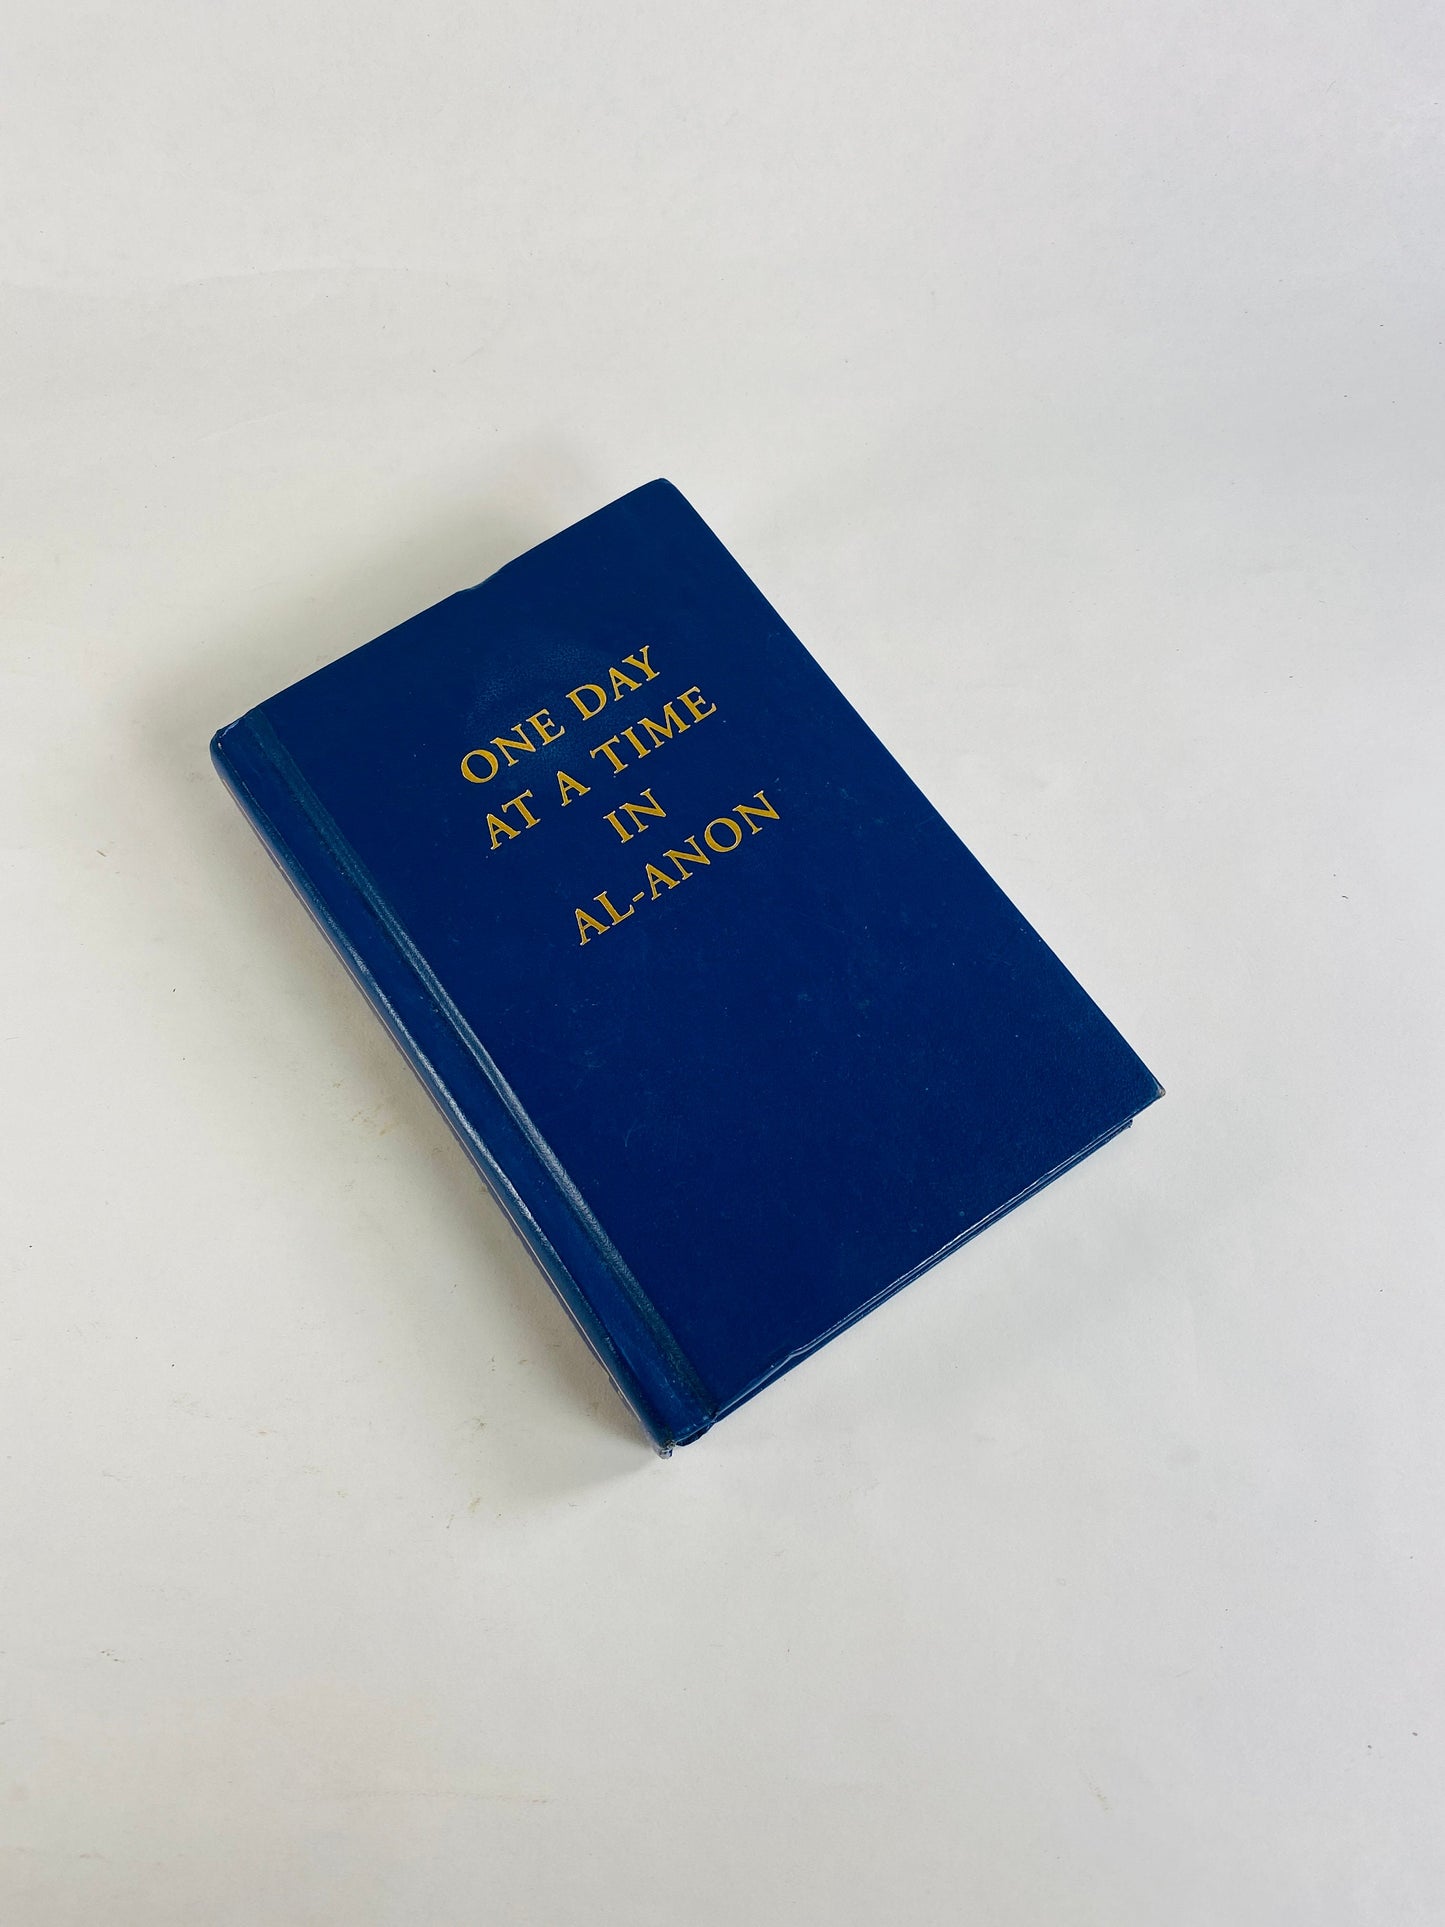 One Day at a Time circa 1989 Vintage Alcoholics Anonymous. Addiction Al-Anon Recovery. Sobriety Gift. Vintage blue book